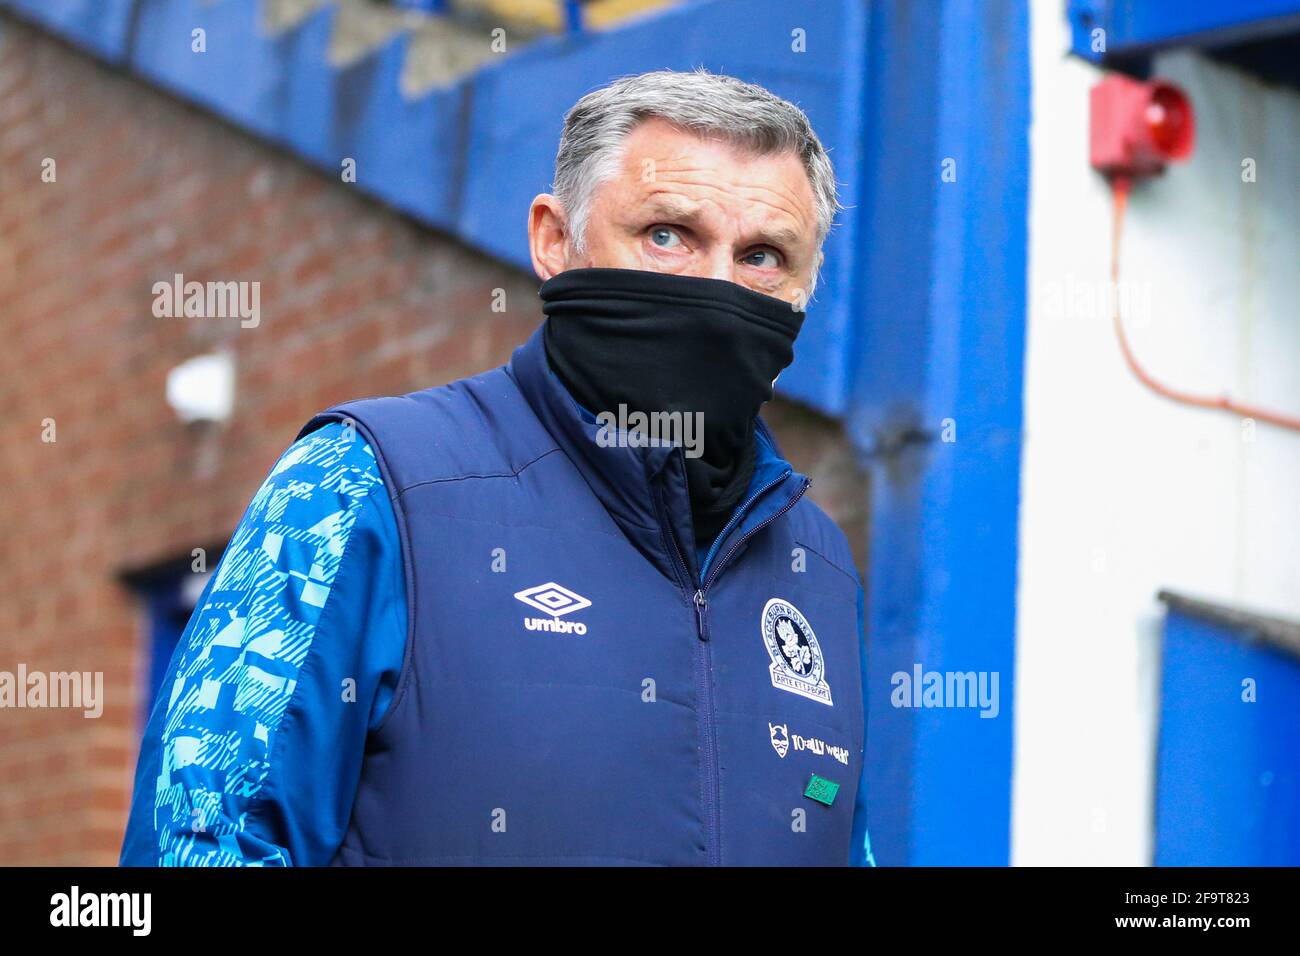 Sheffield, UK. 20th Apr, 2021. Tony Mowbray manager of Blackburn Rovers in Sheffield, United Kingdom on 4/20/2021. (Photo by Isaac Parkin/News Images/Sipa USA) Credit: Sipa USA/Alamy Live News Stock Photo